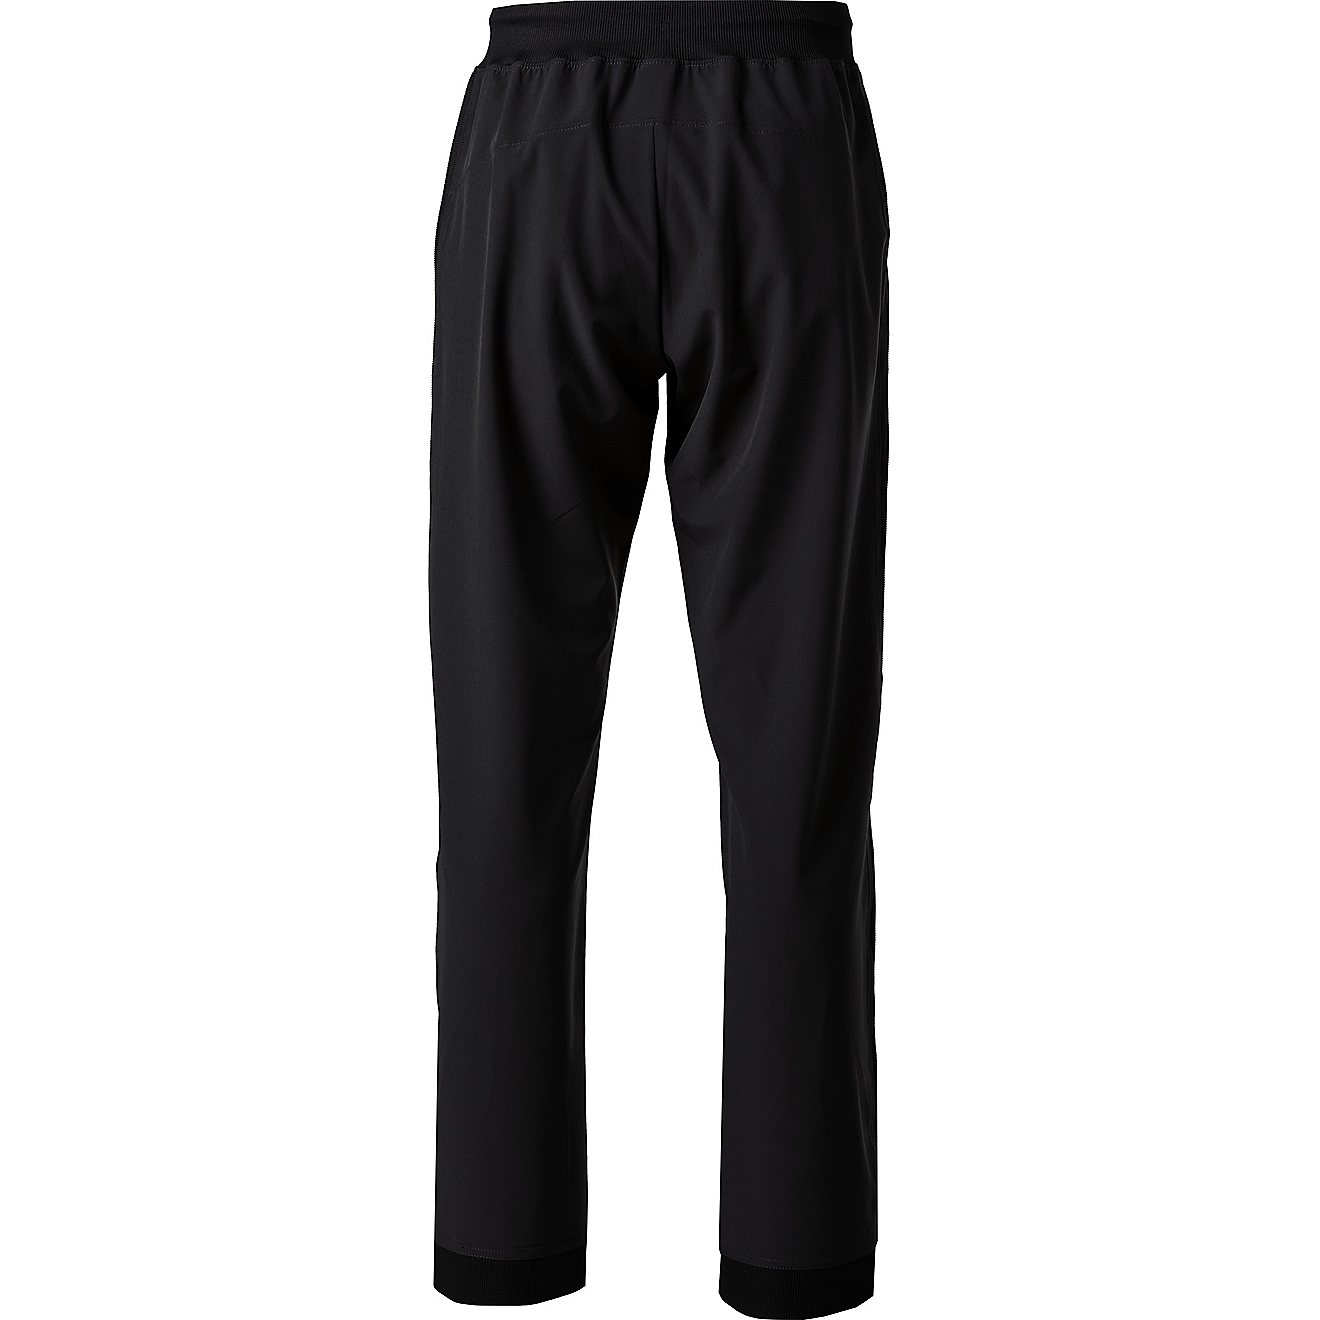 BCG Women's Stretch Woven Athletic Pants                                                                                         - view number 2